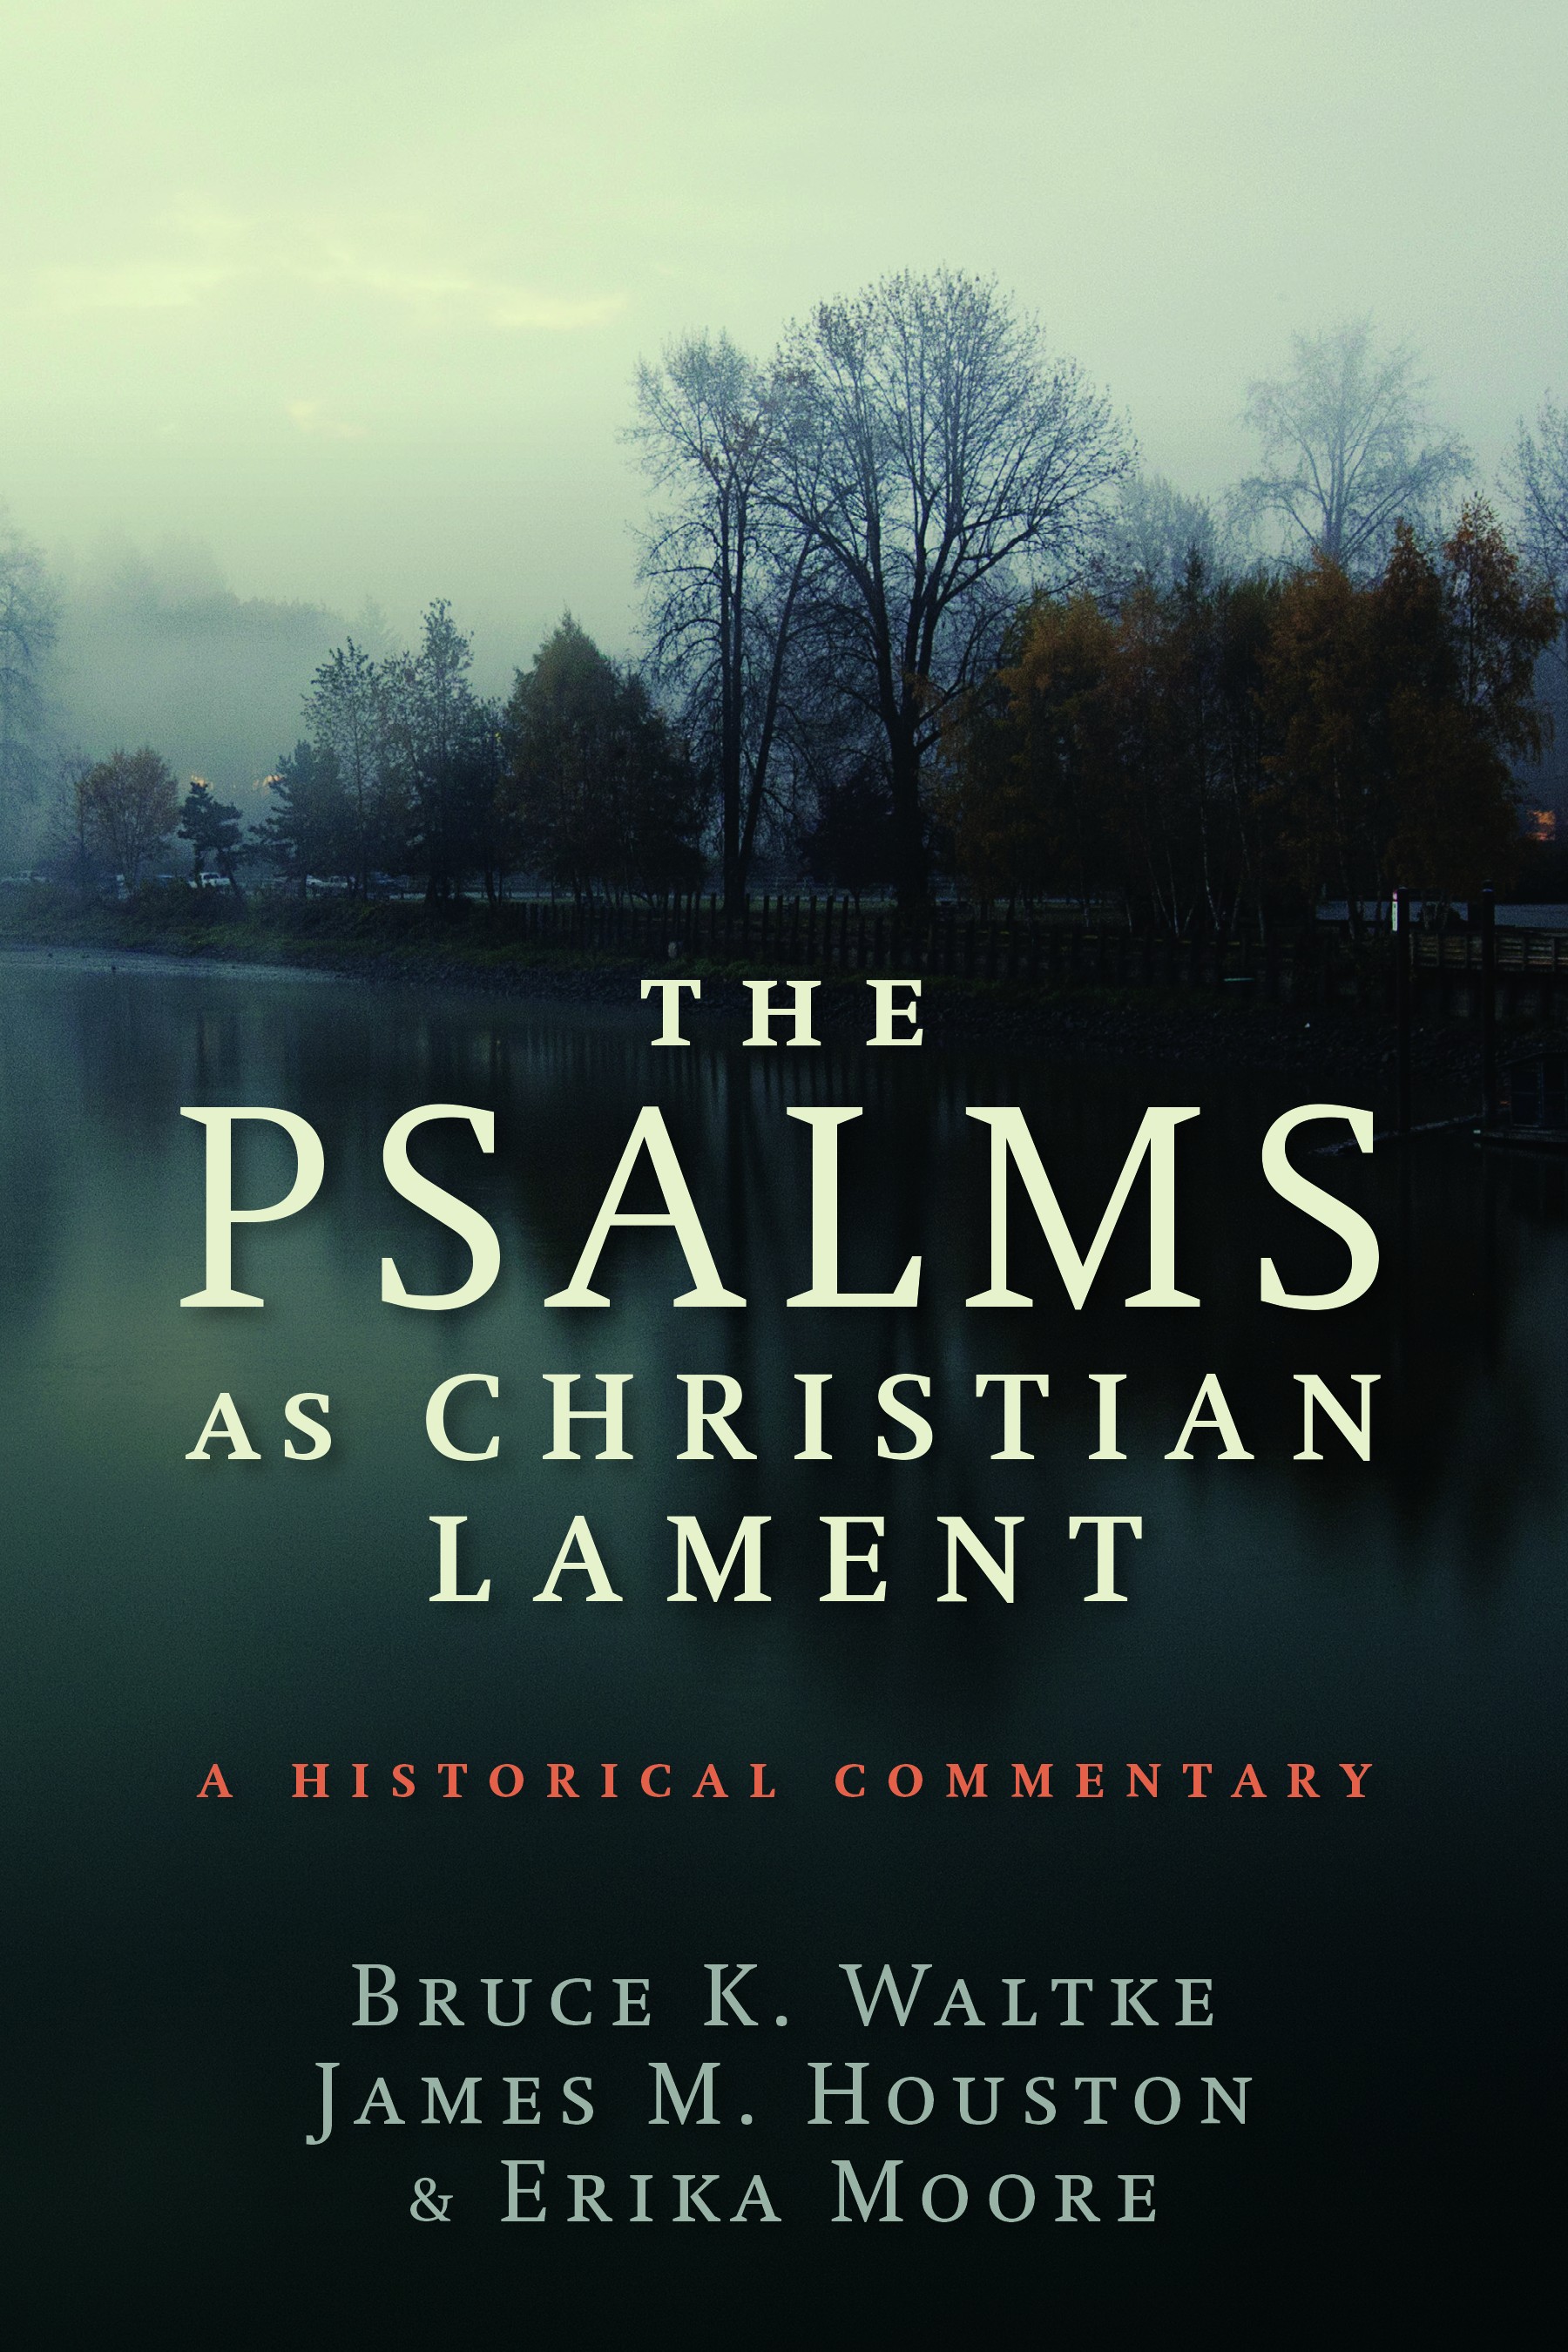 PSALMS AS CHRISTIAN LAMENT (THE) - A HISTORICAL COMMENTARY